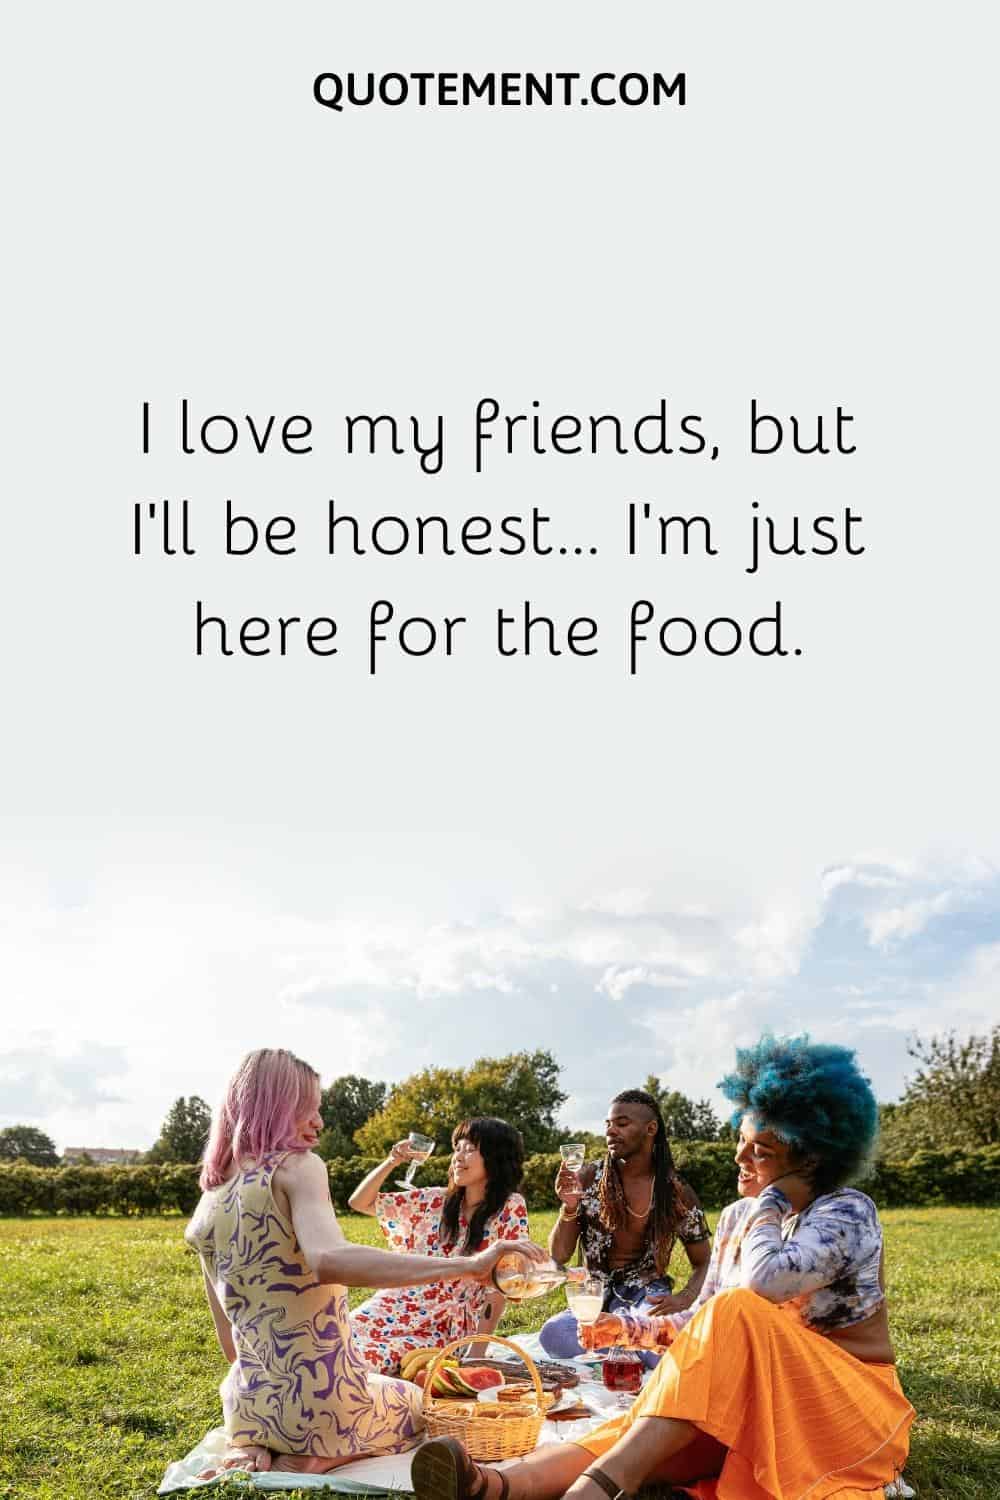 I love my friends, but I'll be honest... I'm just here for the food.